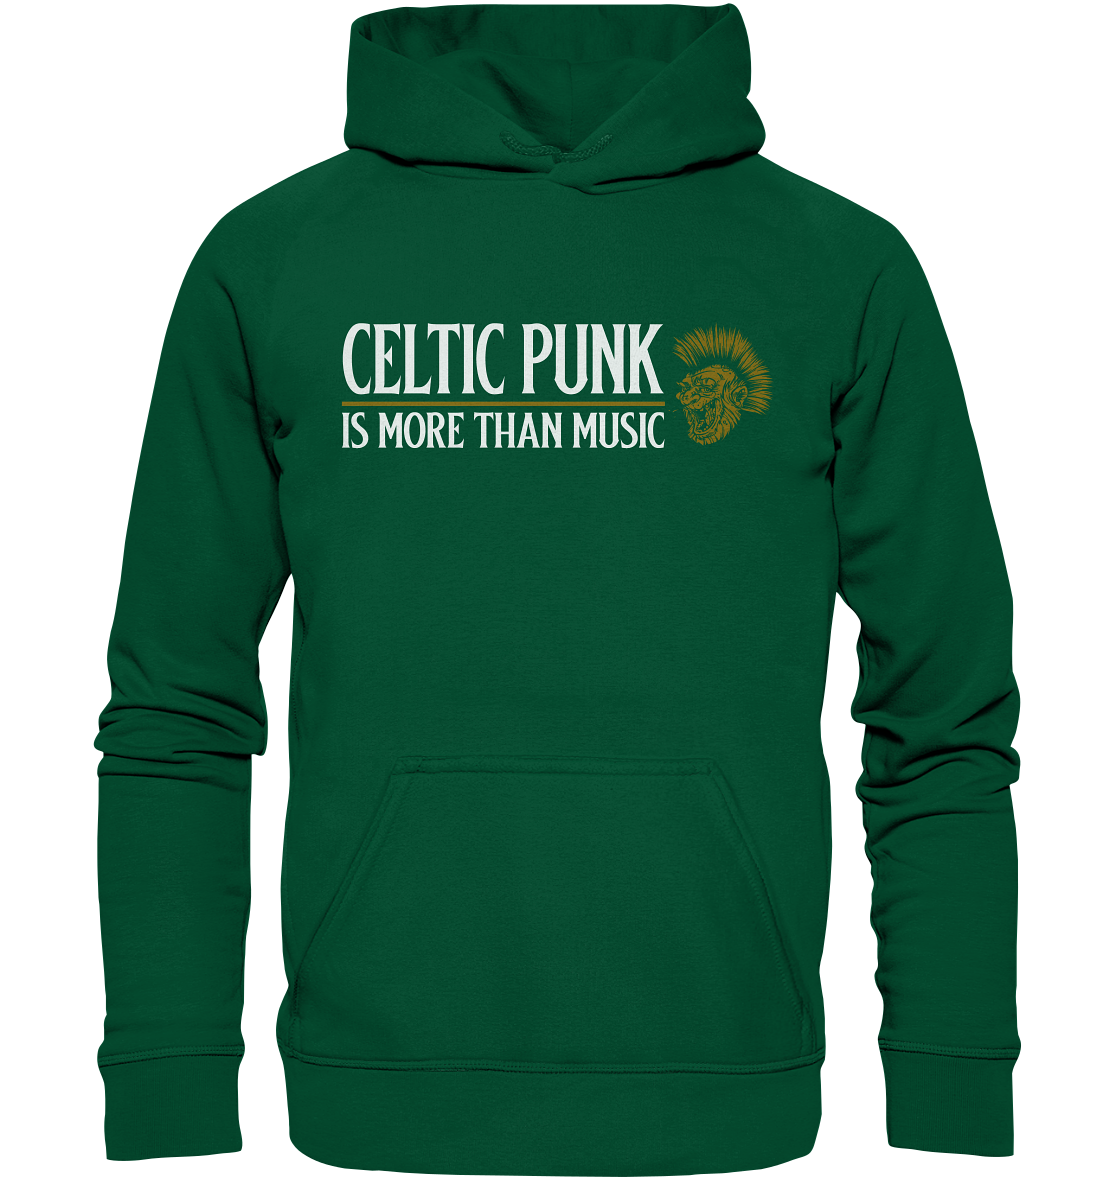 Celtic Punk "Is More Than Music" - Basic Unisex Hoodie